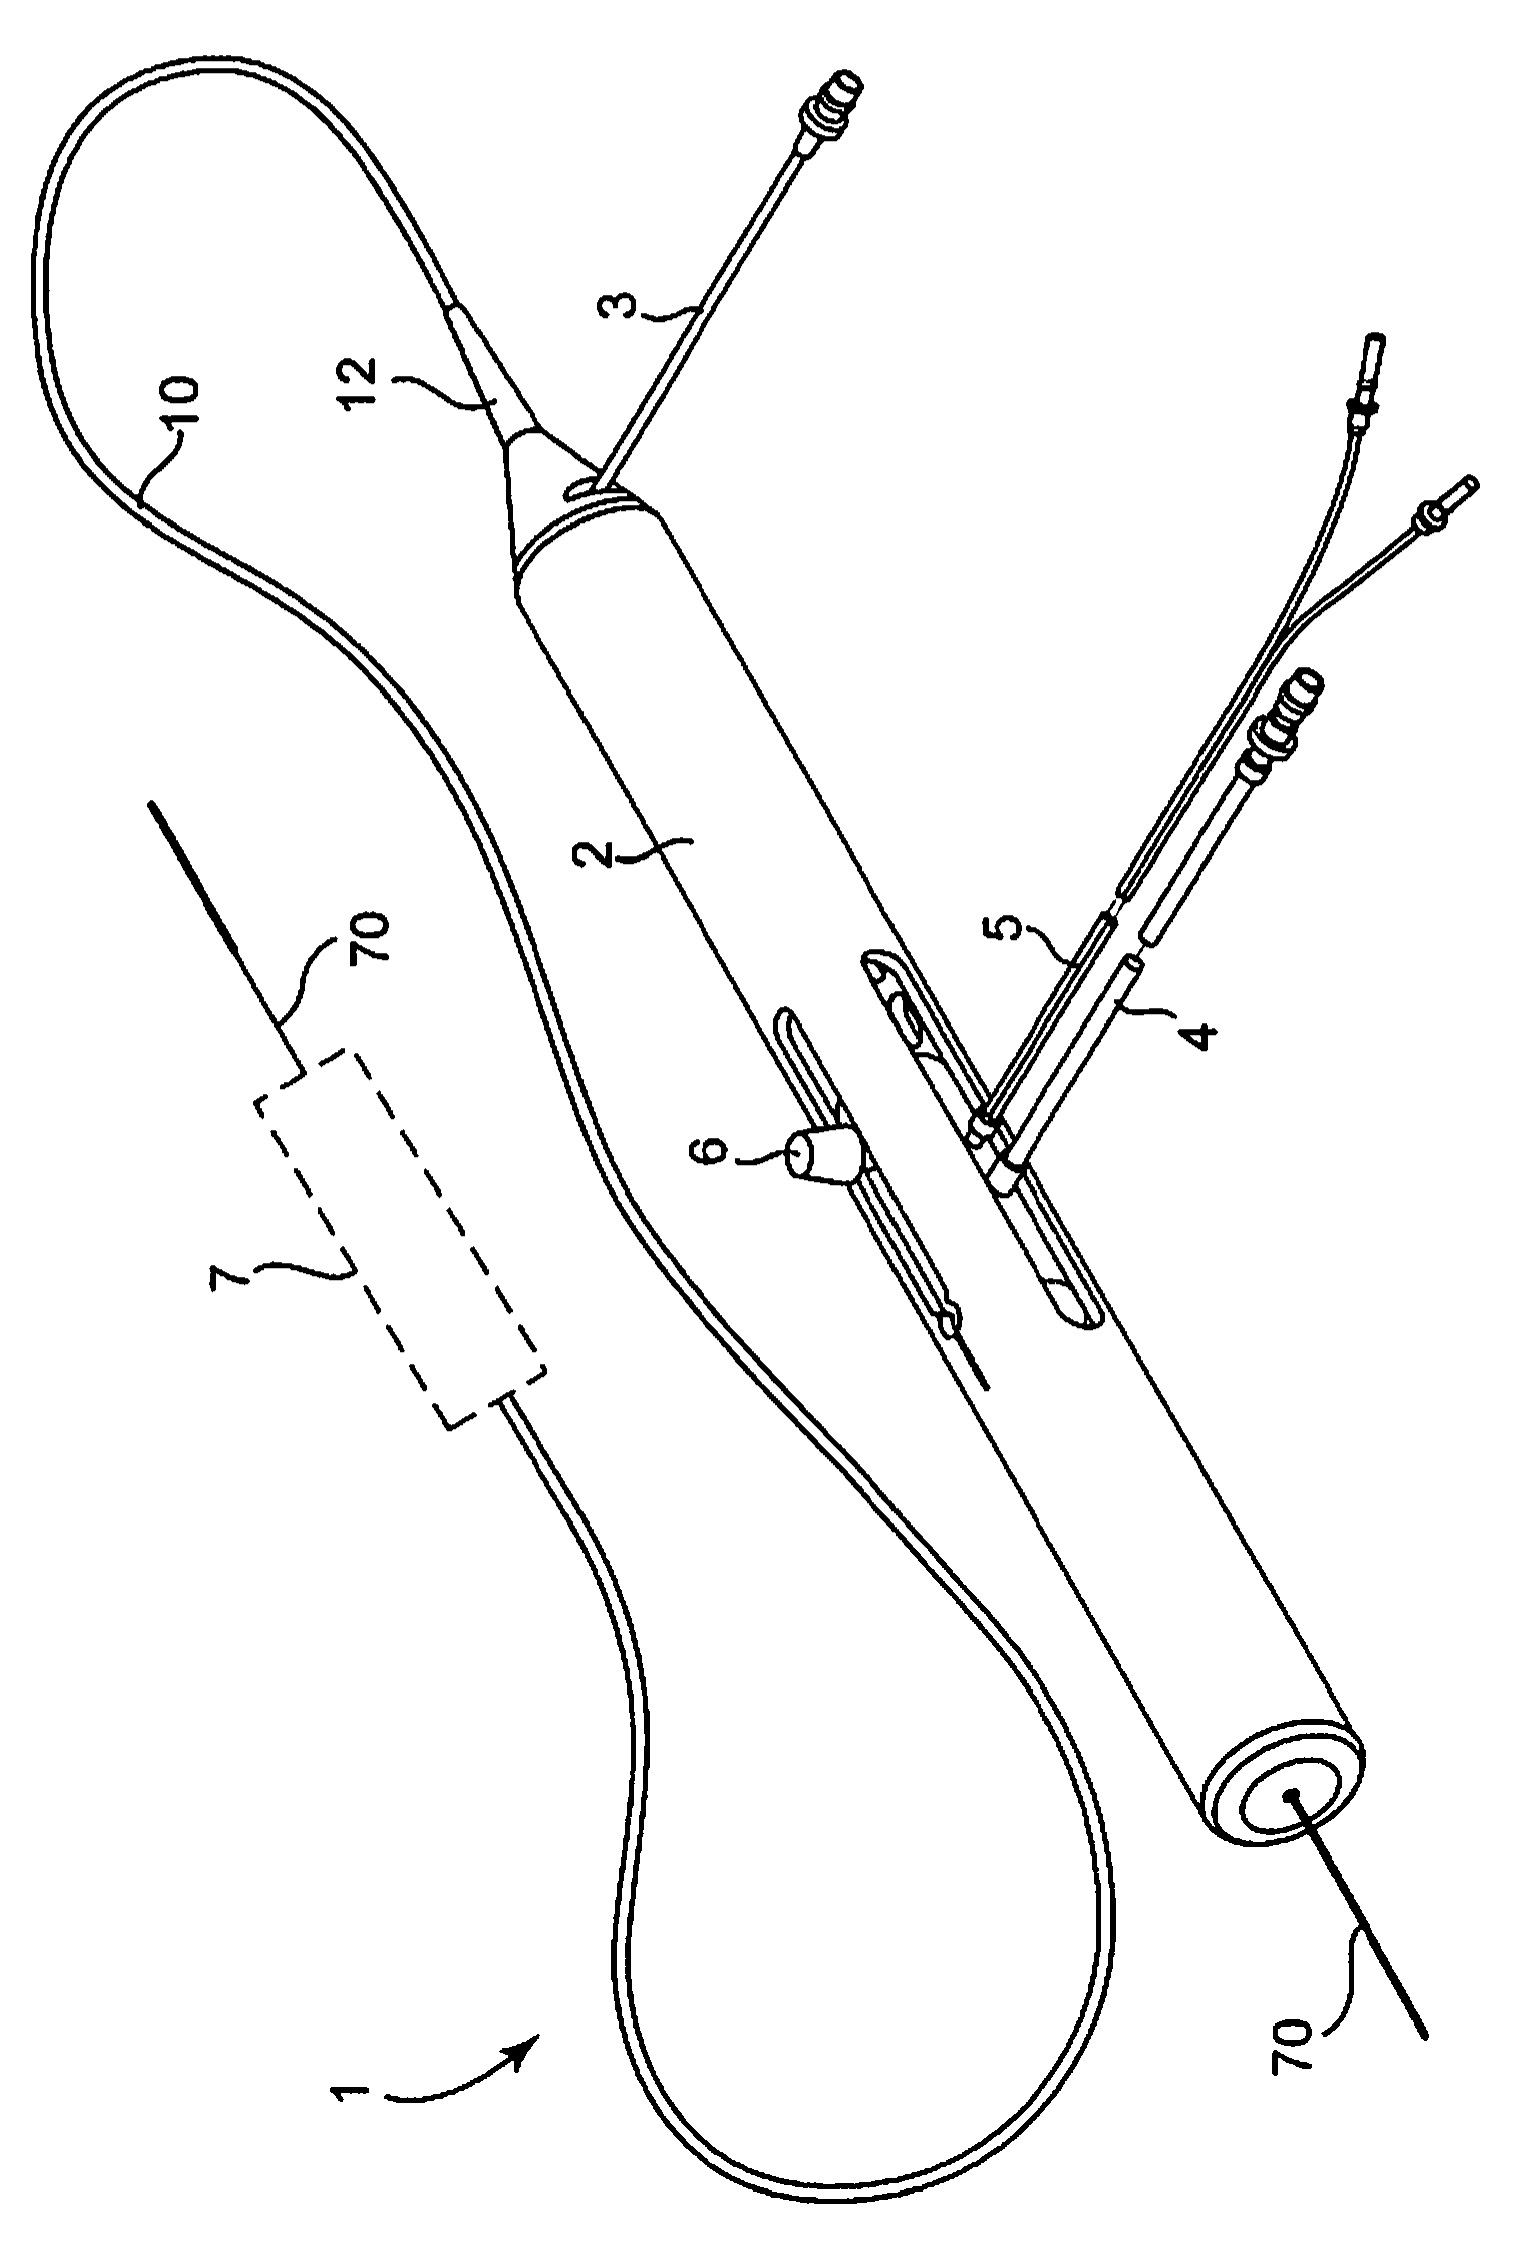 Abrasive nose cone with expandable cutting and sanding region for rotational atherectomy device